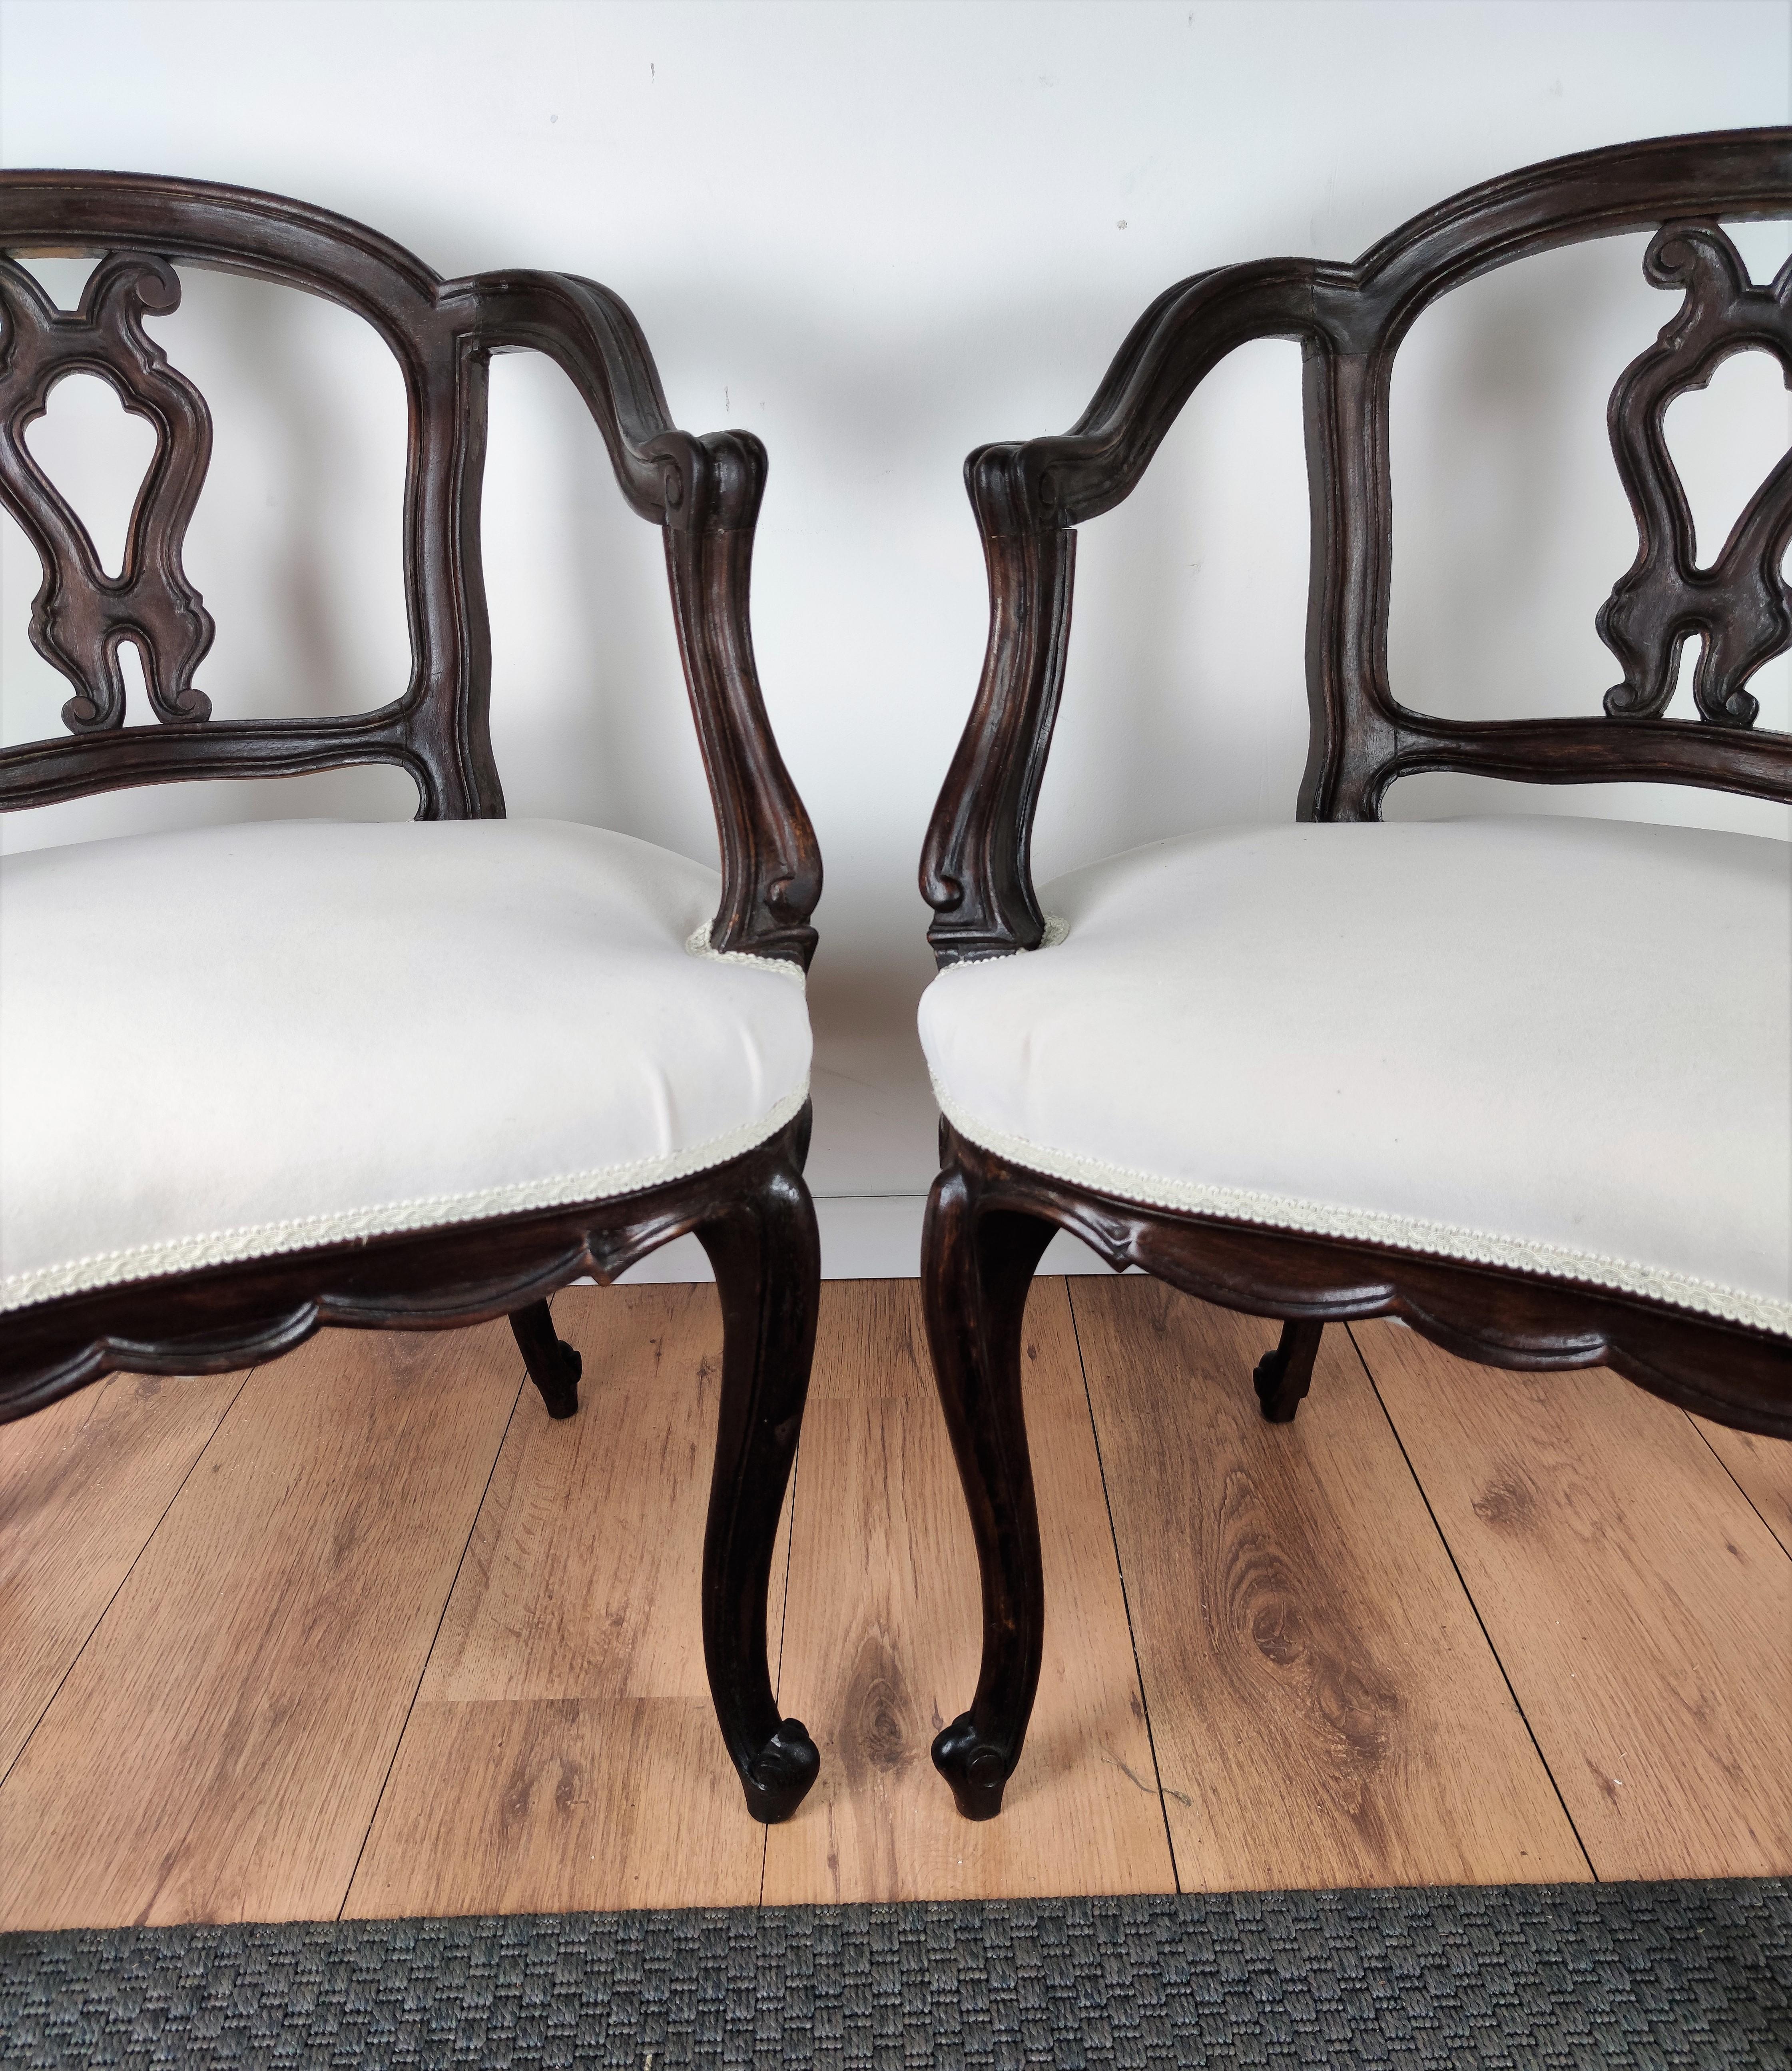 Pair of 19th Century Italian Rococo Baroque Carved Wood Armchair Re-Upholstered For Sale 3